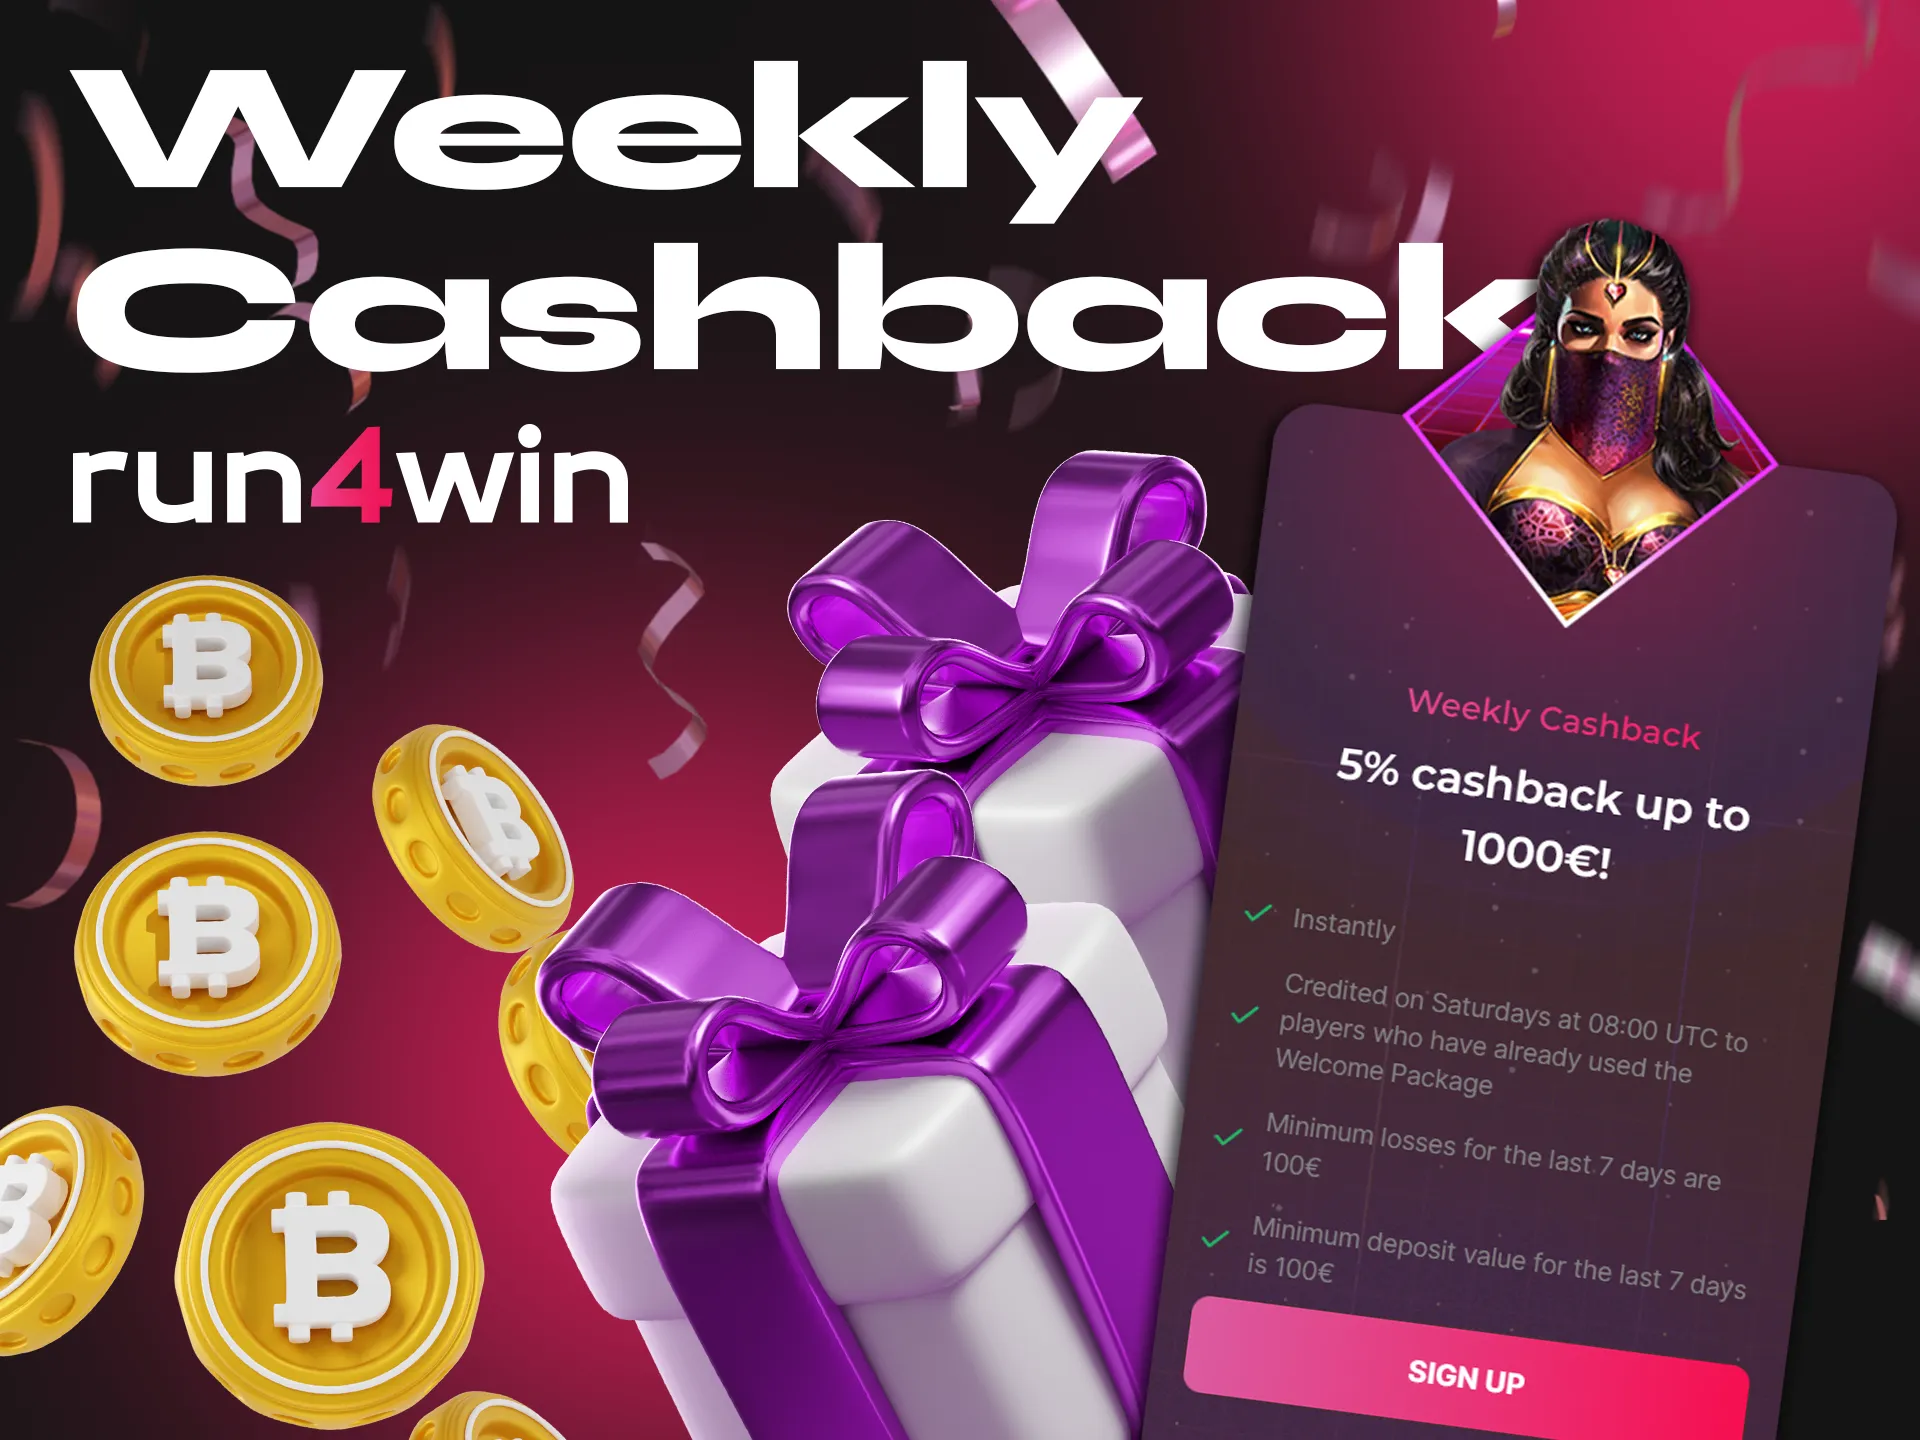 Run4Win players are entitled to a weekly cashback of 5%.